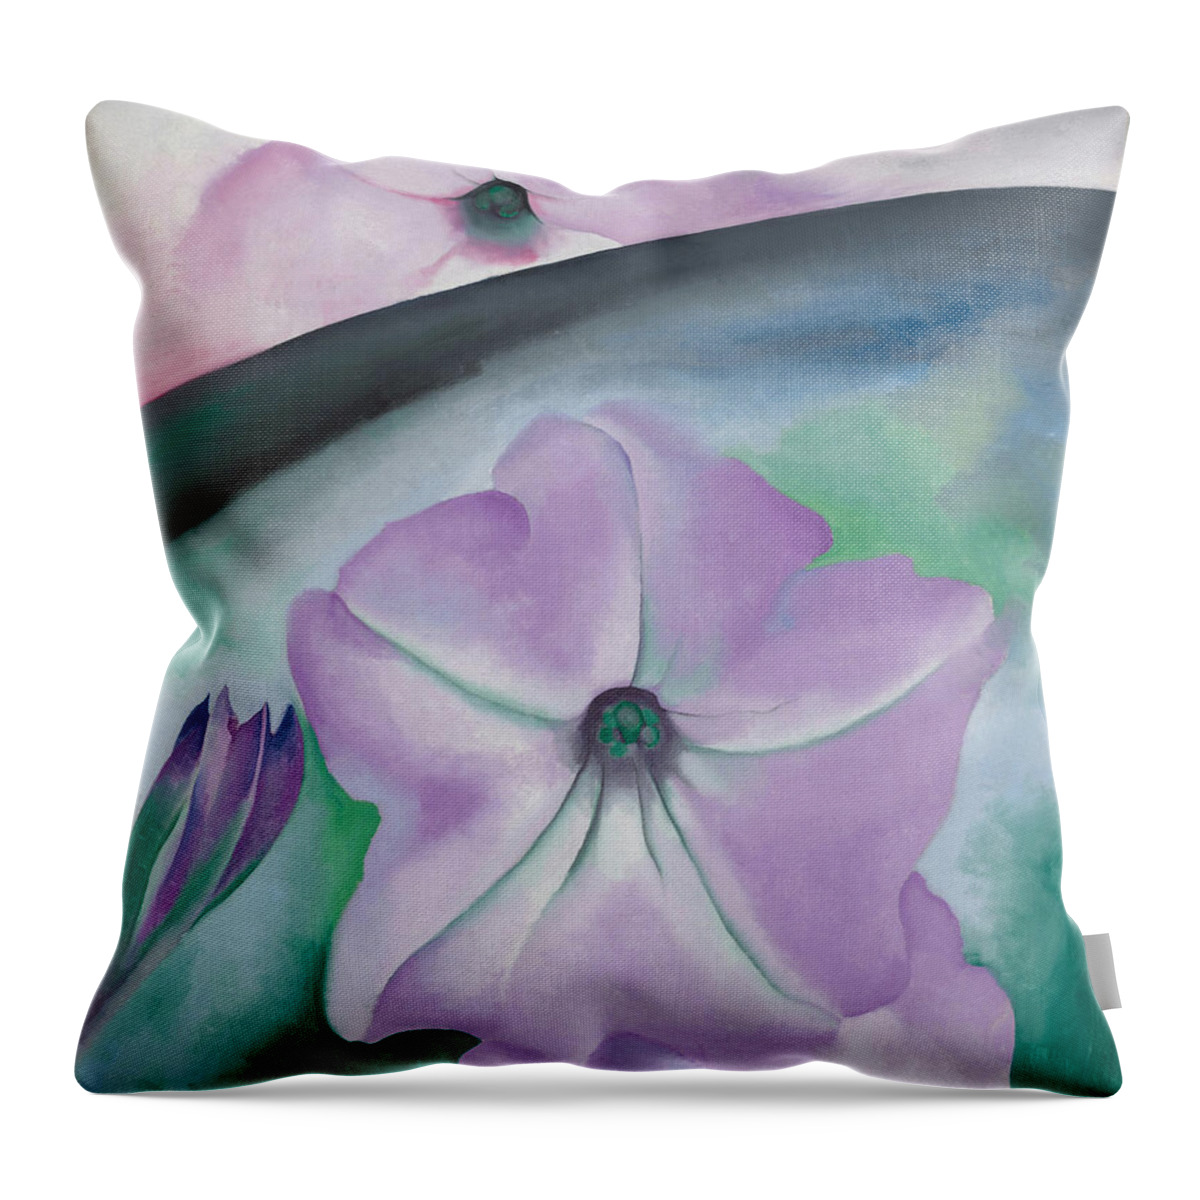 Georgia O'keeffe Throw Pillow featuring the painting Petunia no 2. - Modernist pink flower painting by Georgia O'Keeffe